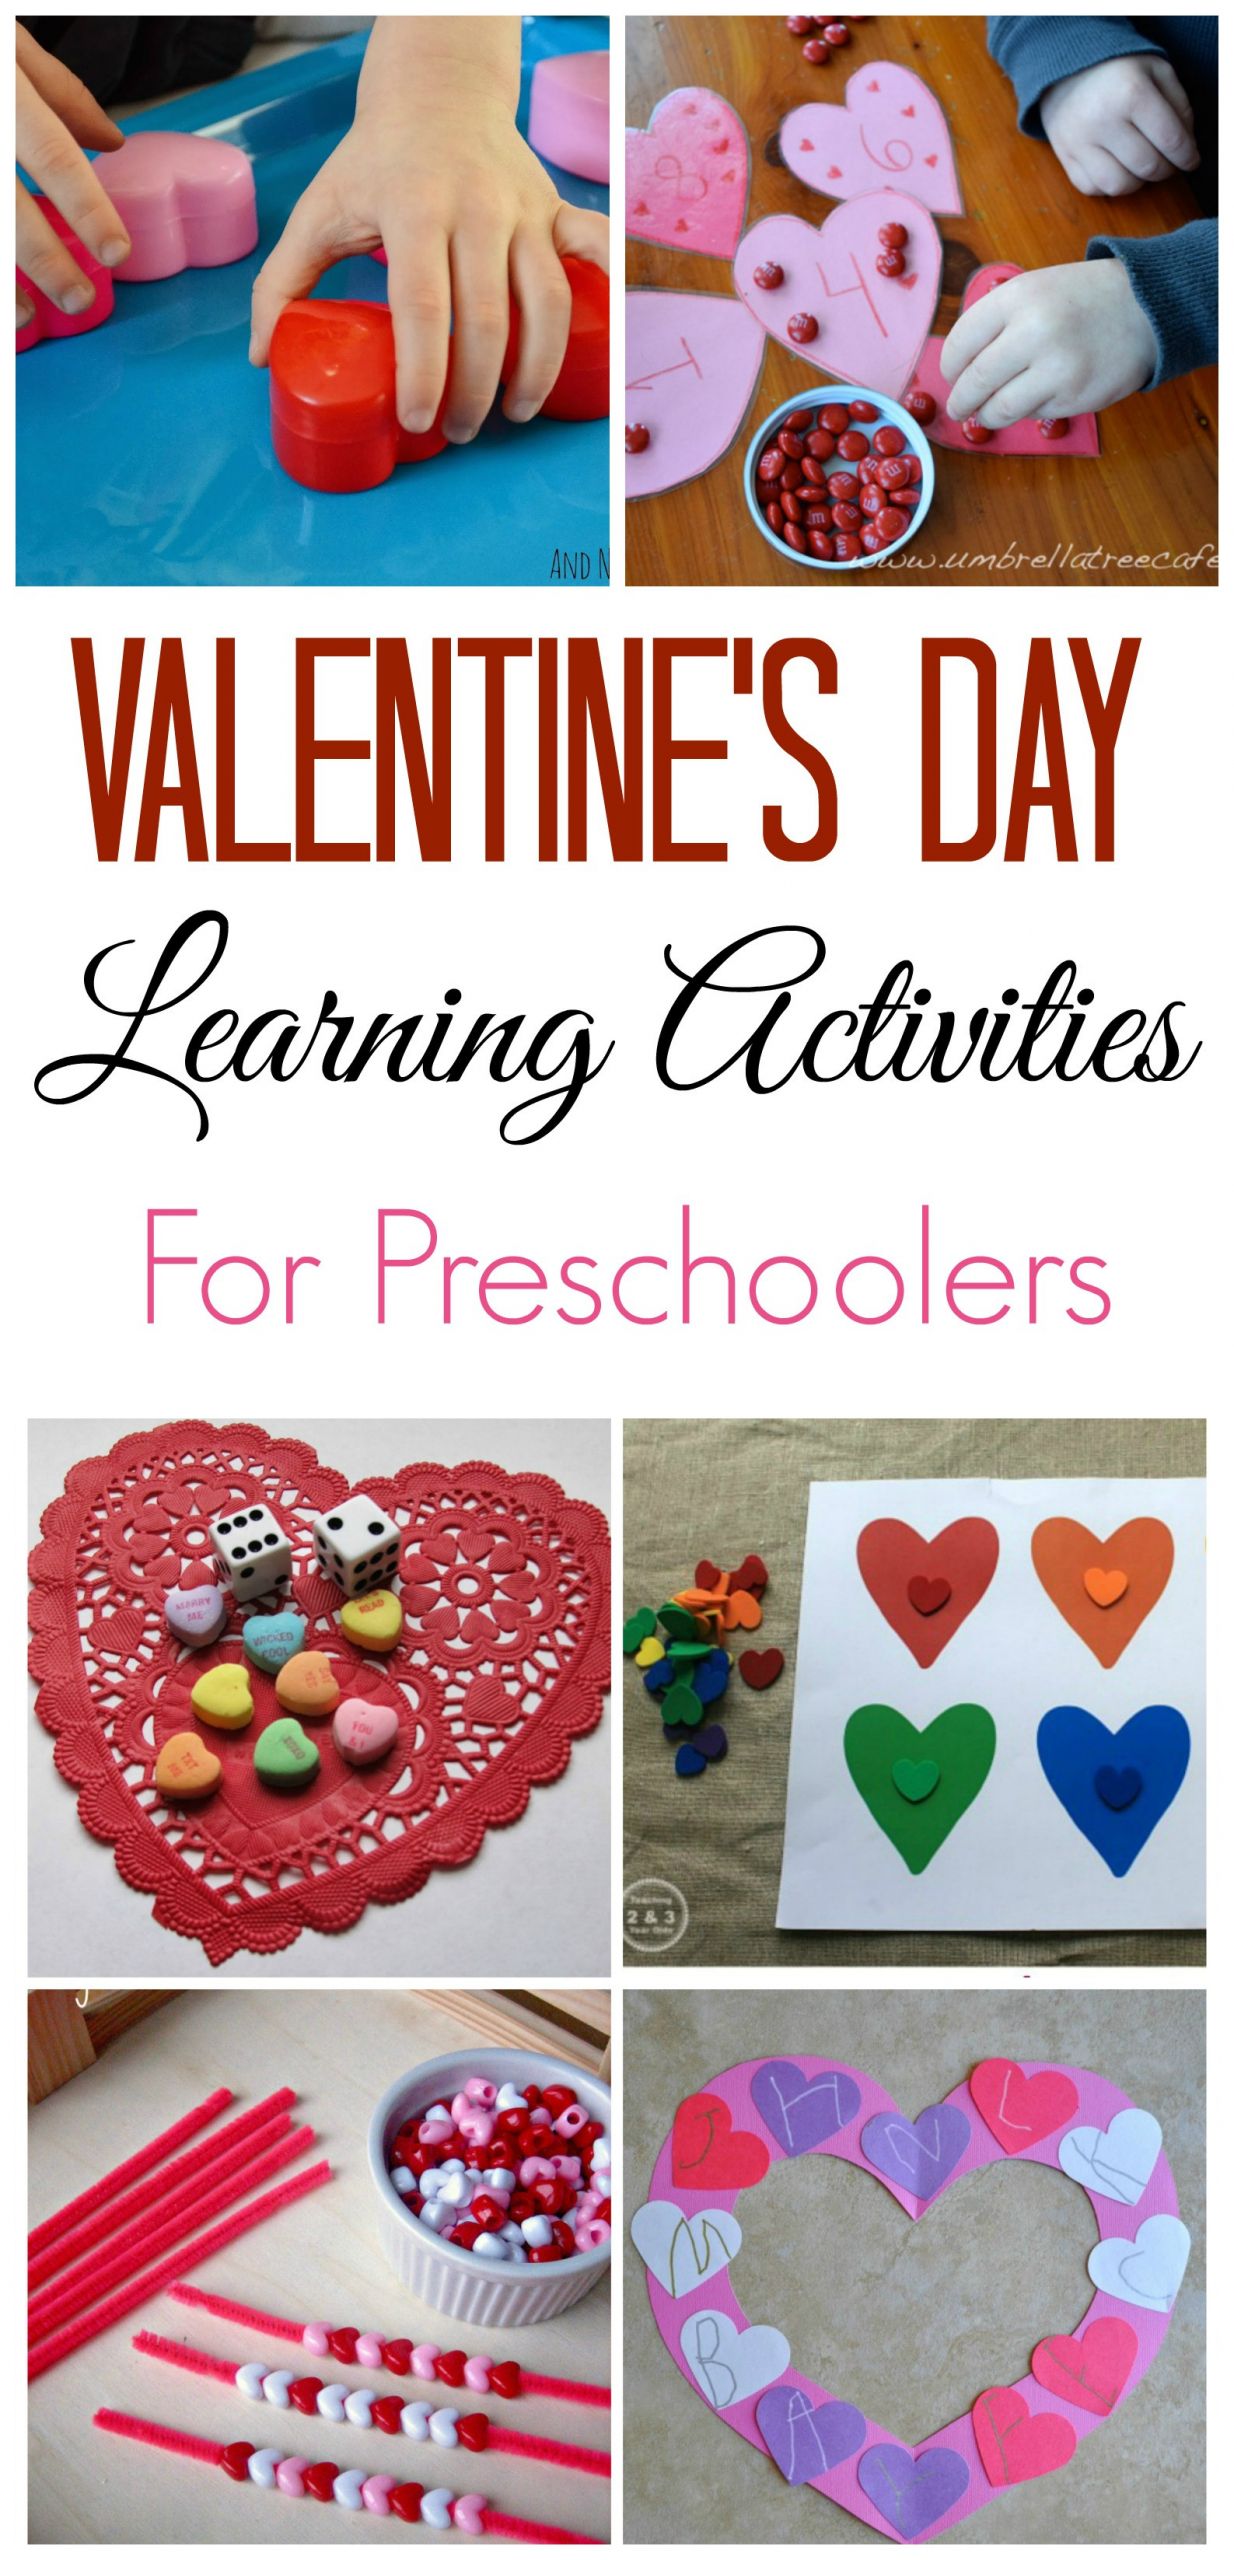 Valentines Day Ideas For Preschool
 Valentine s Day Learning Activities for Preschoolers